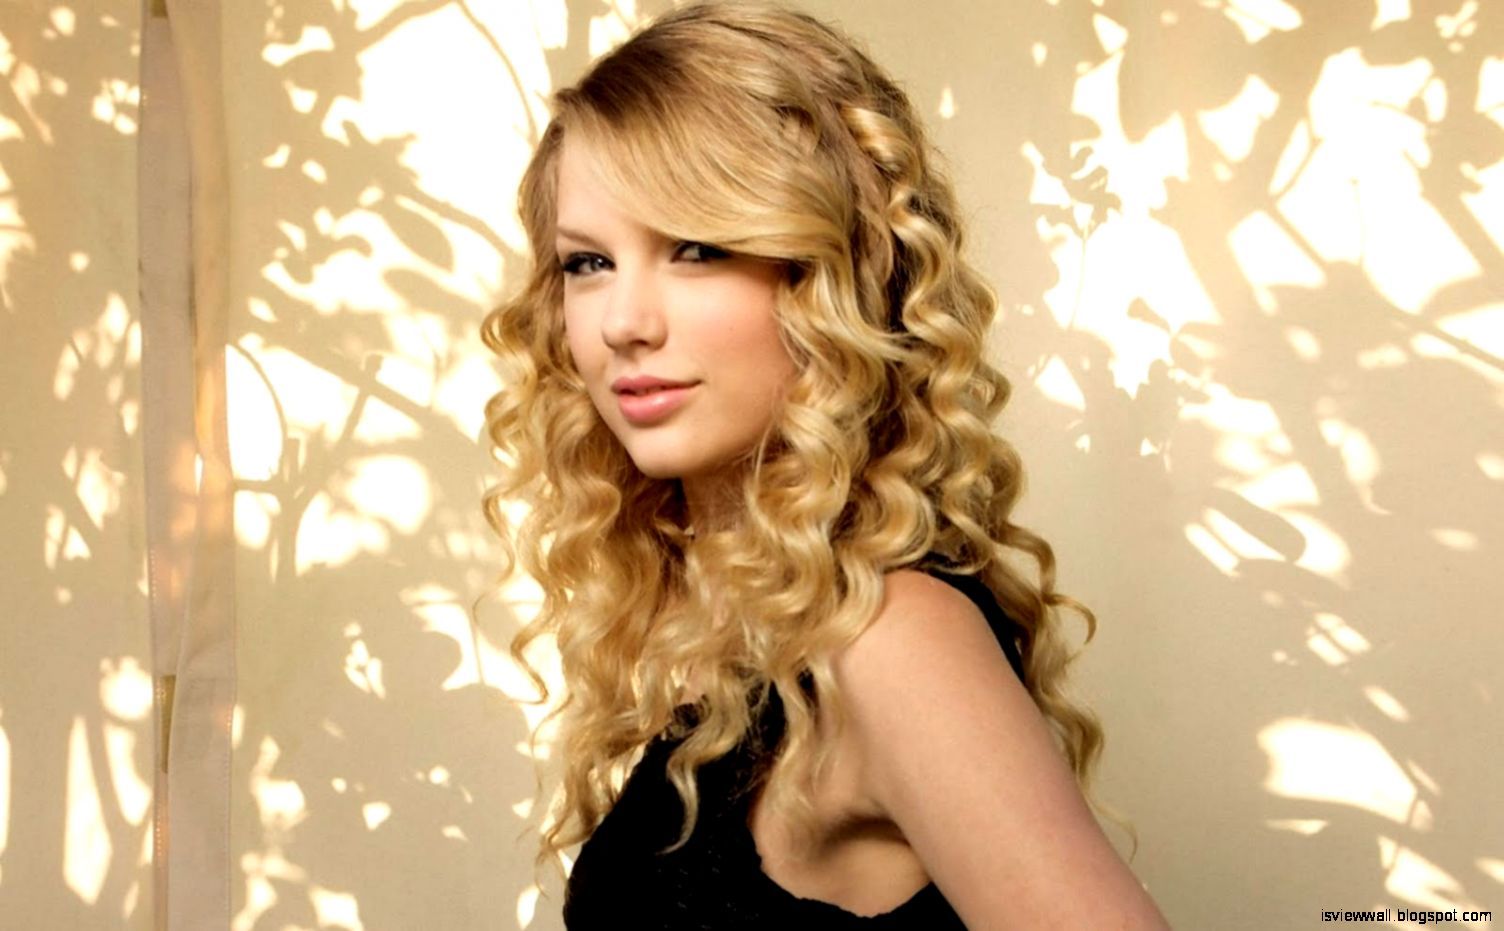 Taylor Swift Images Wallpaper Hd | View Wallpapers